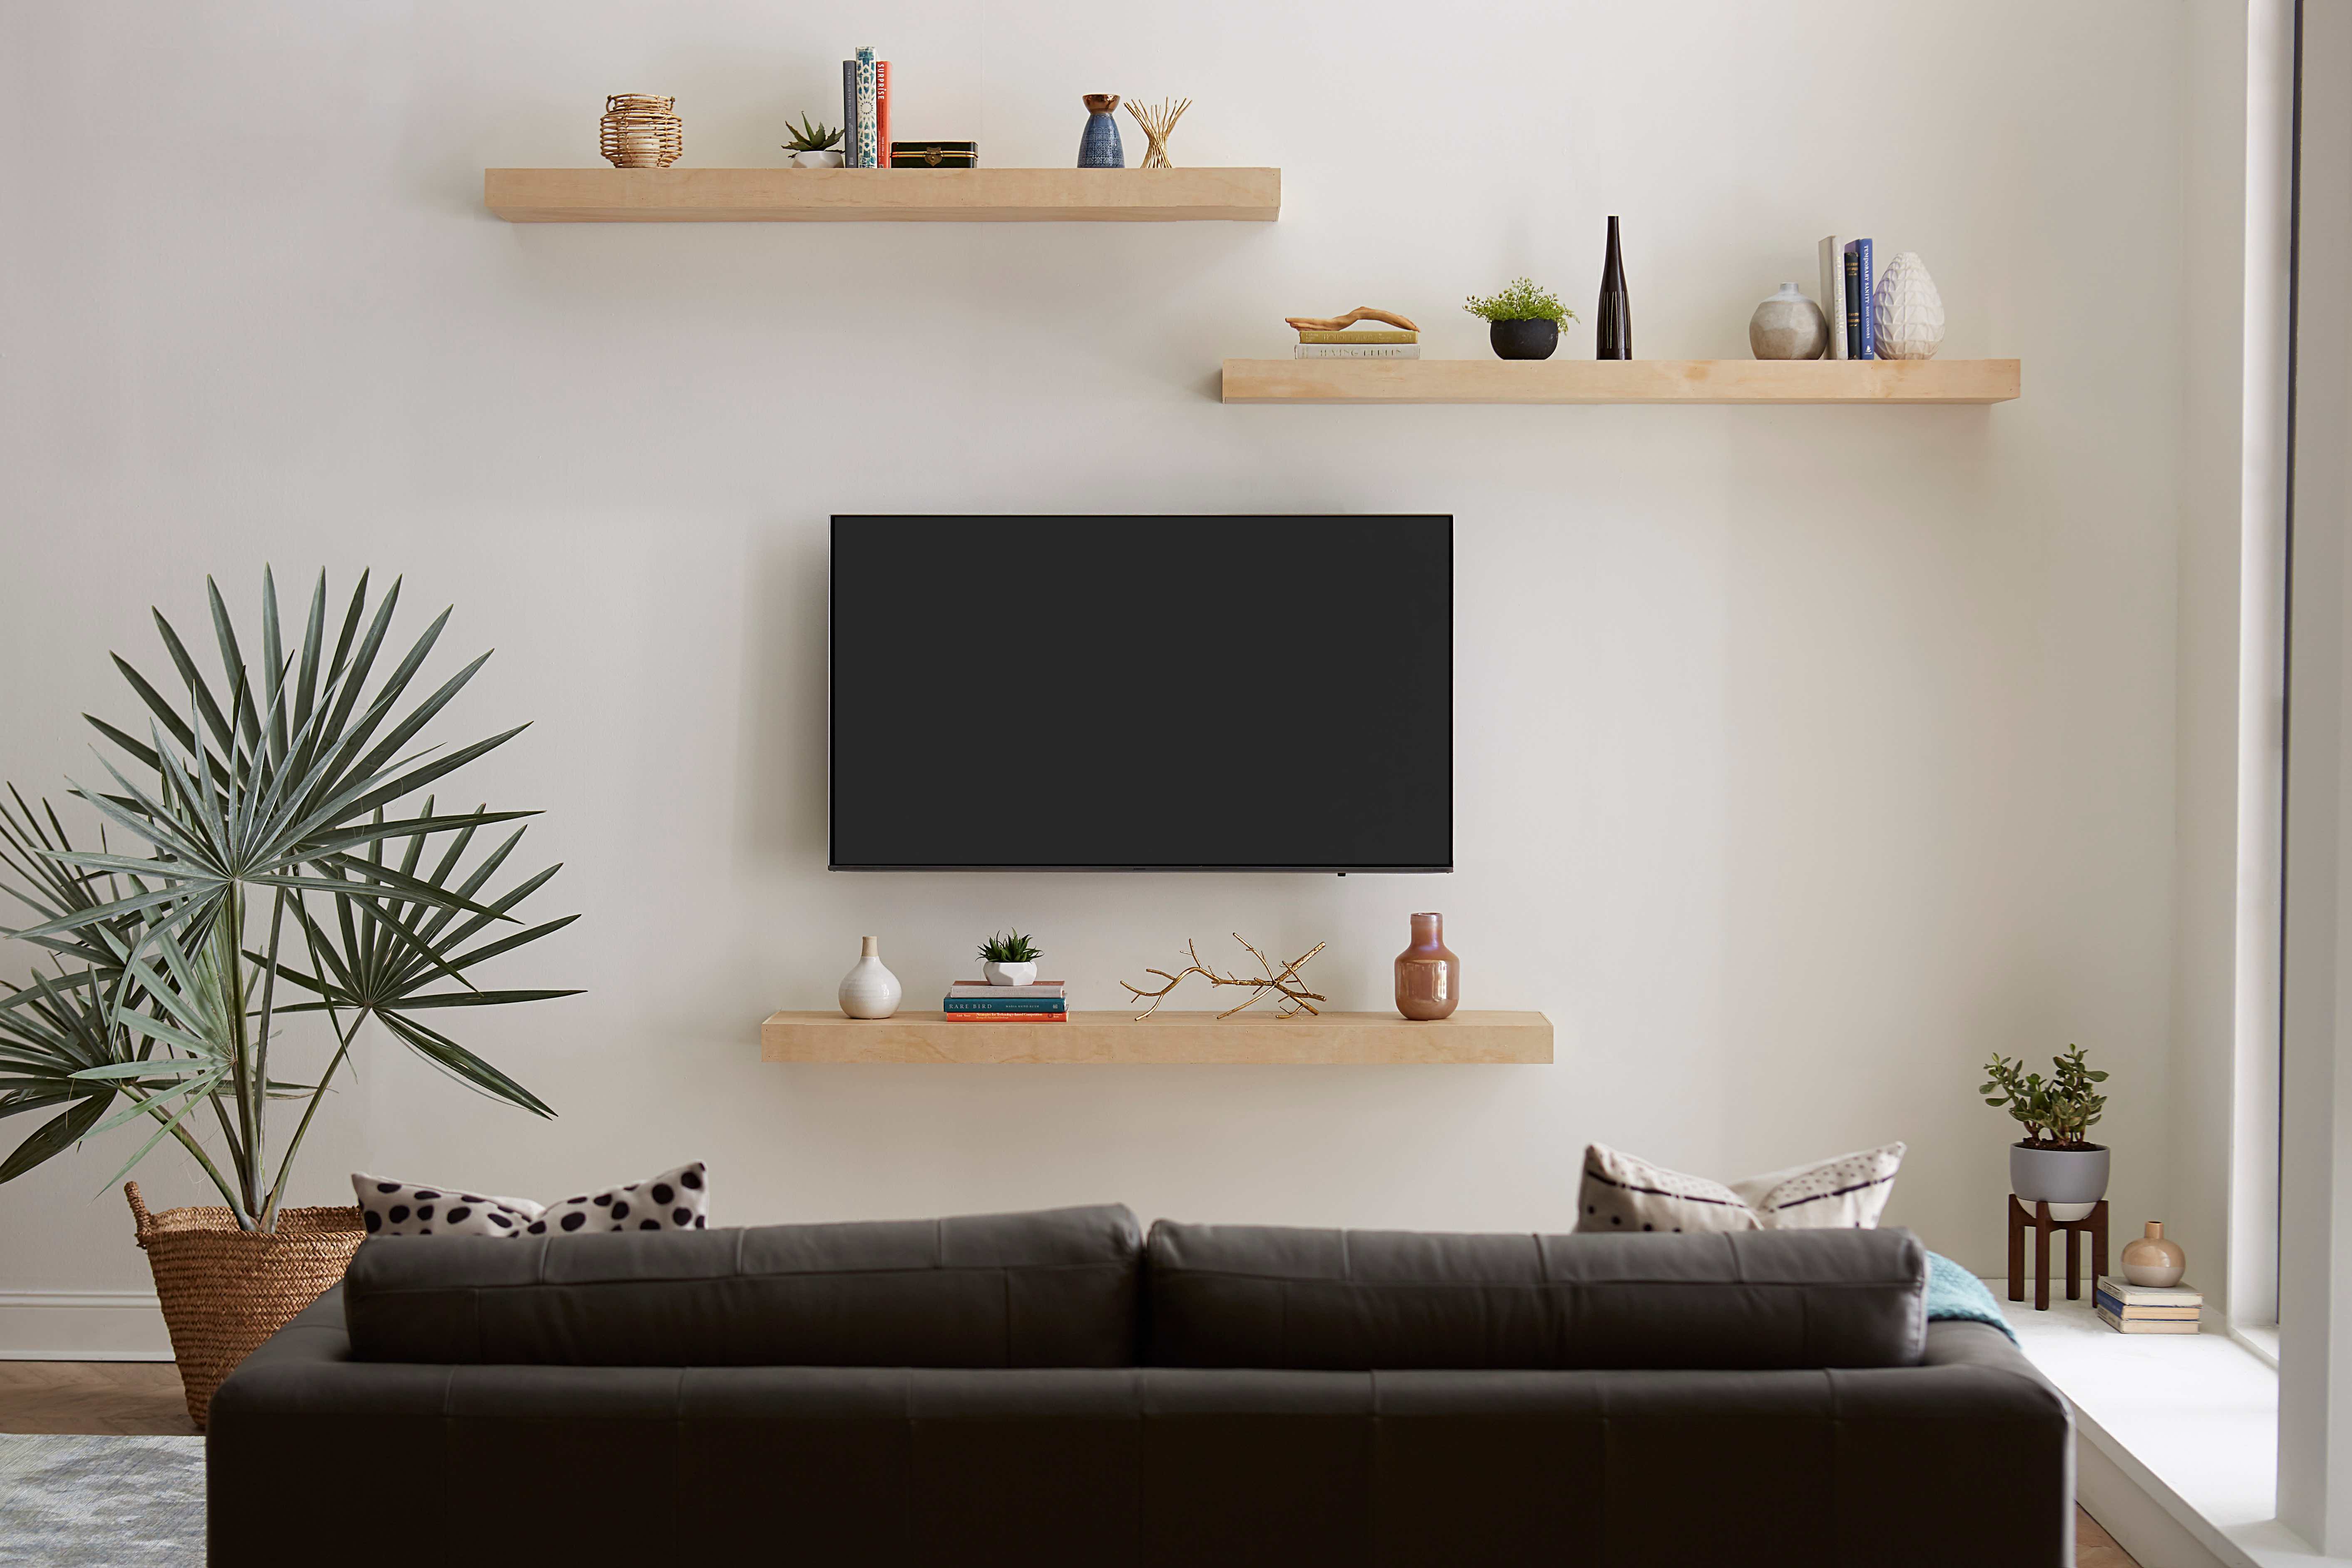 How To Decorate Around Your Tv With Floating Shelves - Floating Shelf For Tv Wall Mount